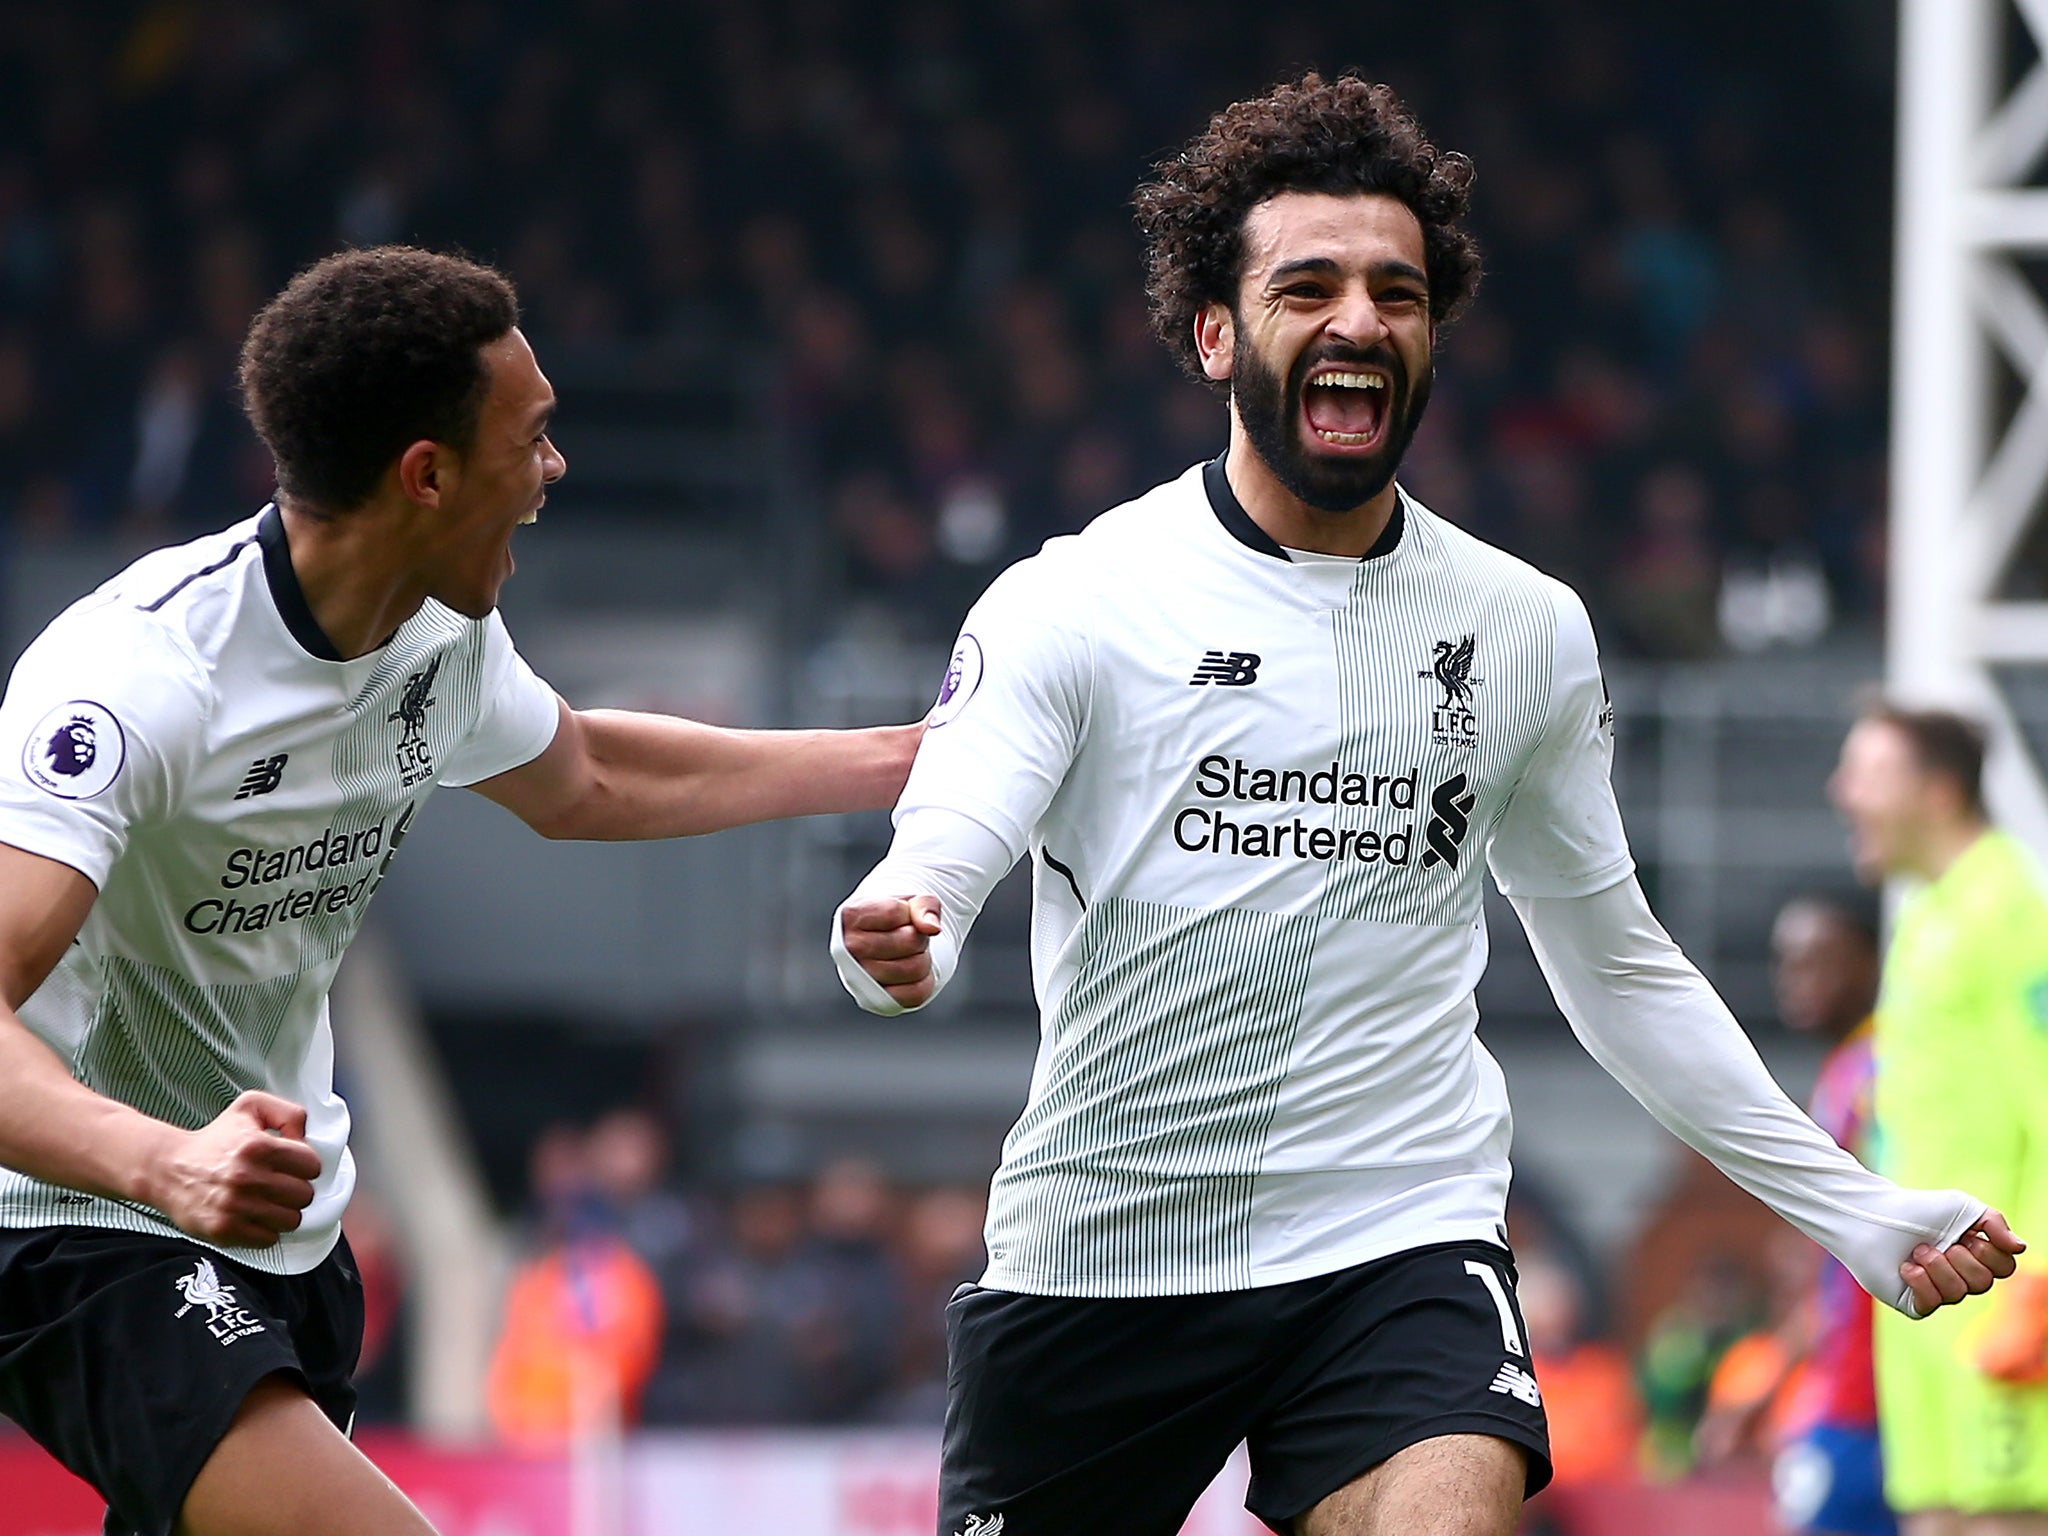 Mohamed Salah can terrify any defence he faces, according to Virgil van Dijk